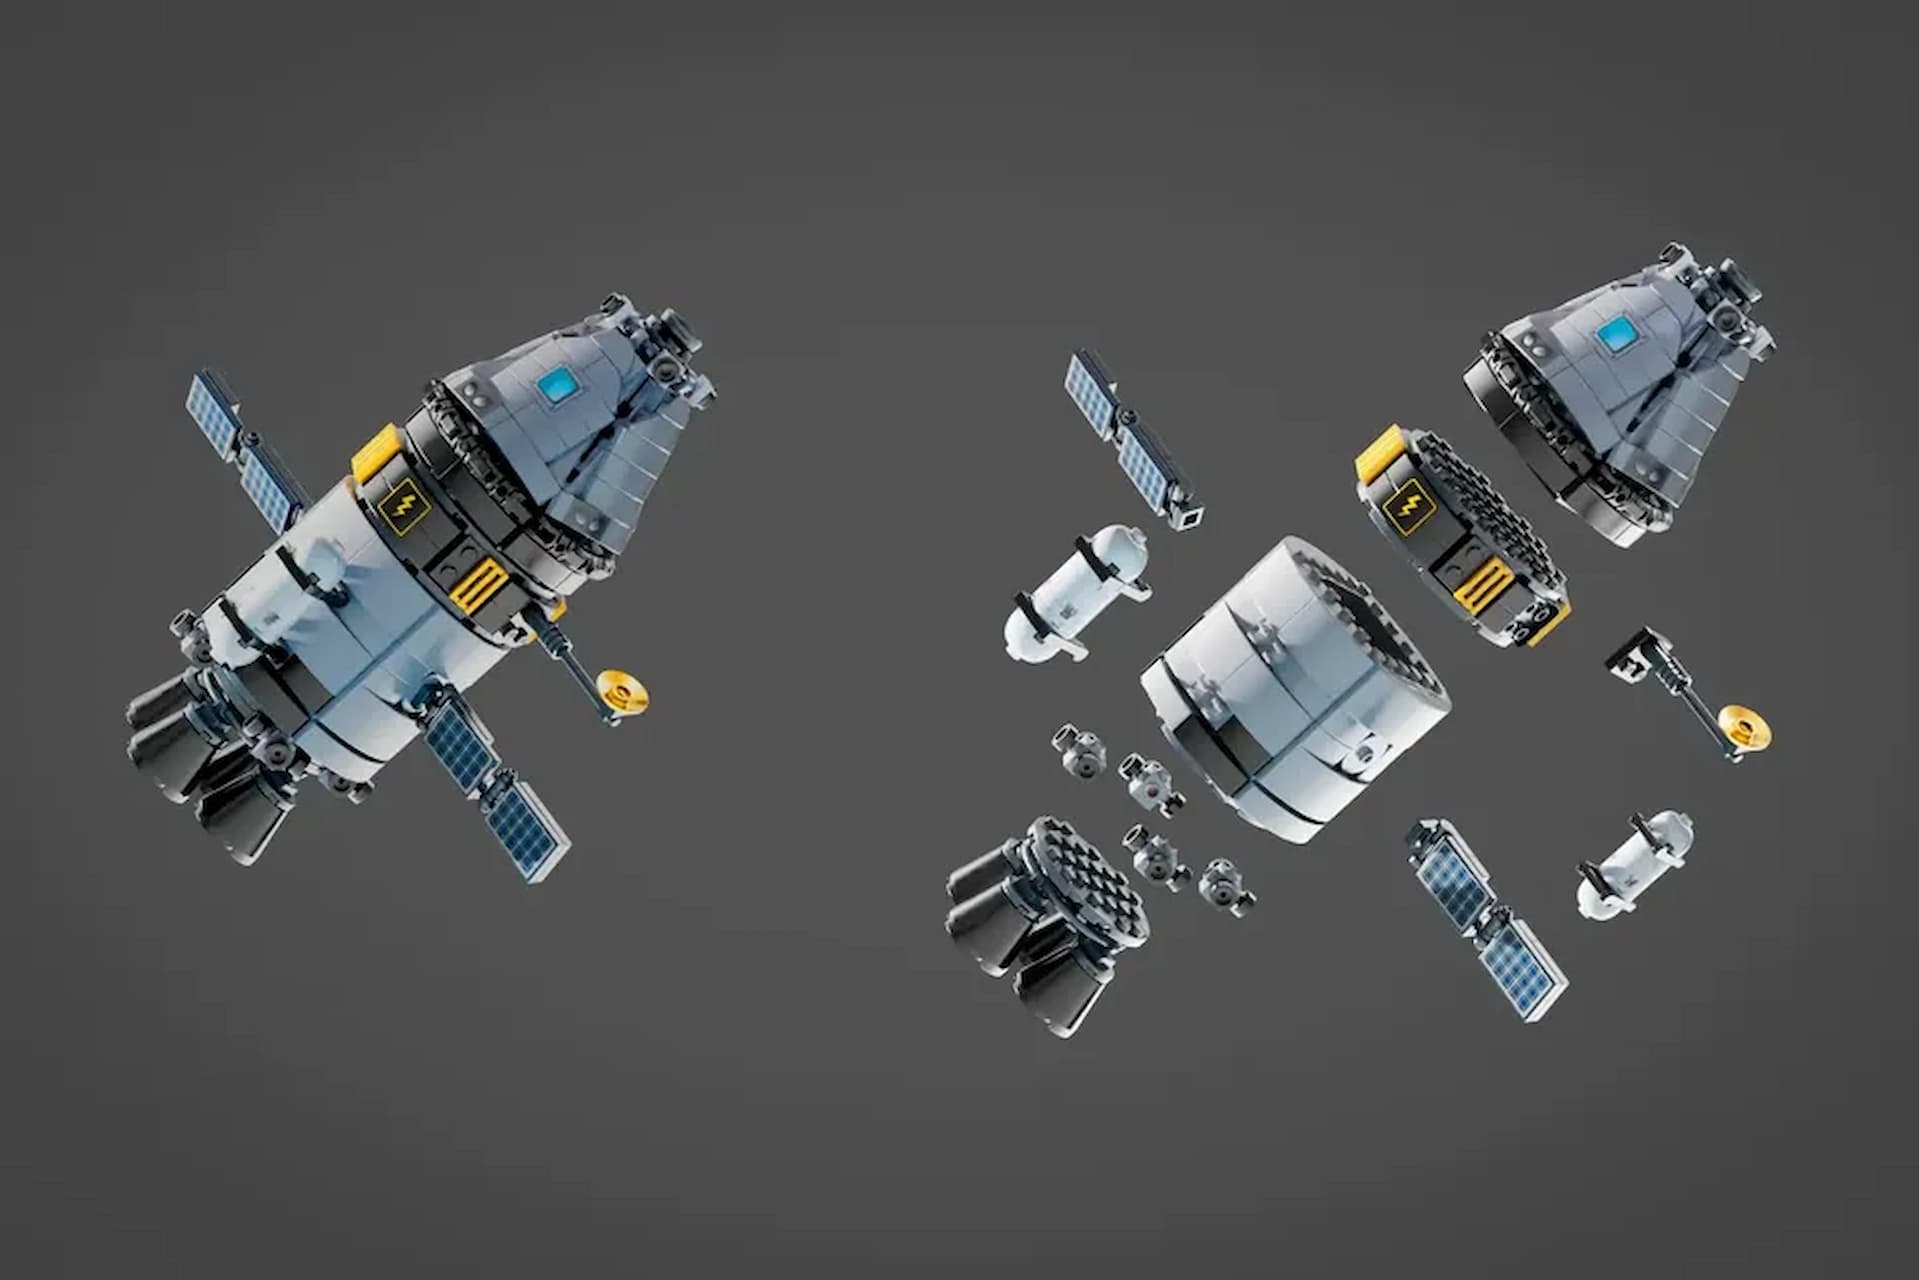 Concept images of the Lego Ideas Kerbal Space Program submission